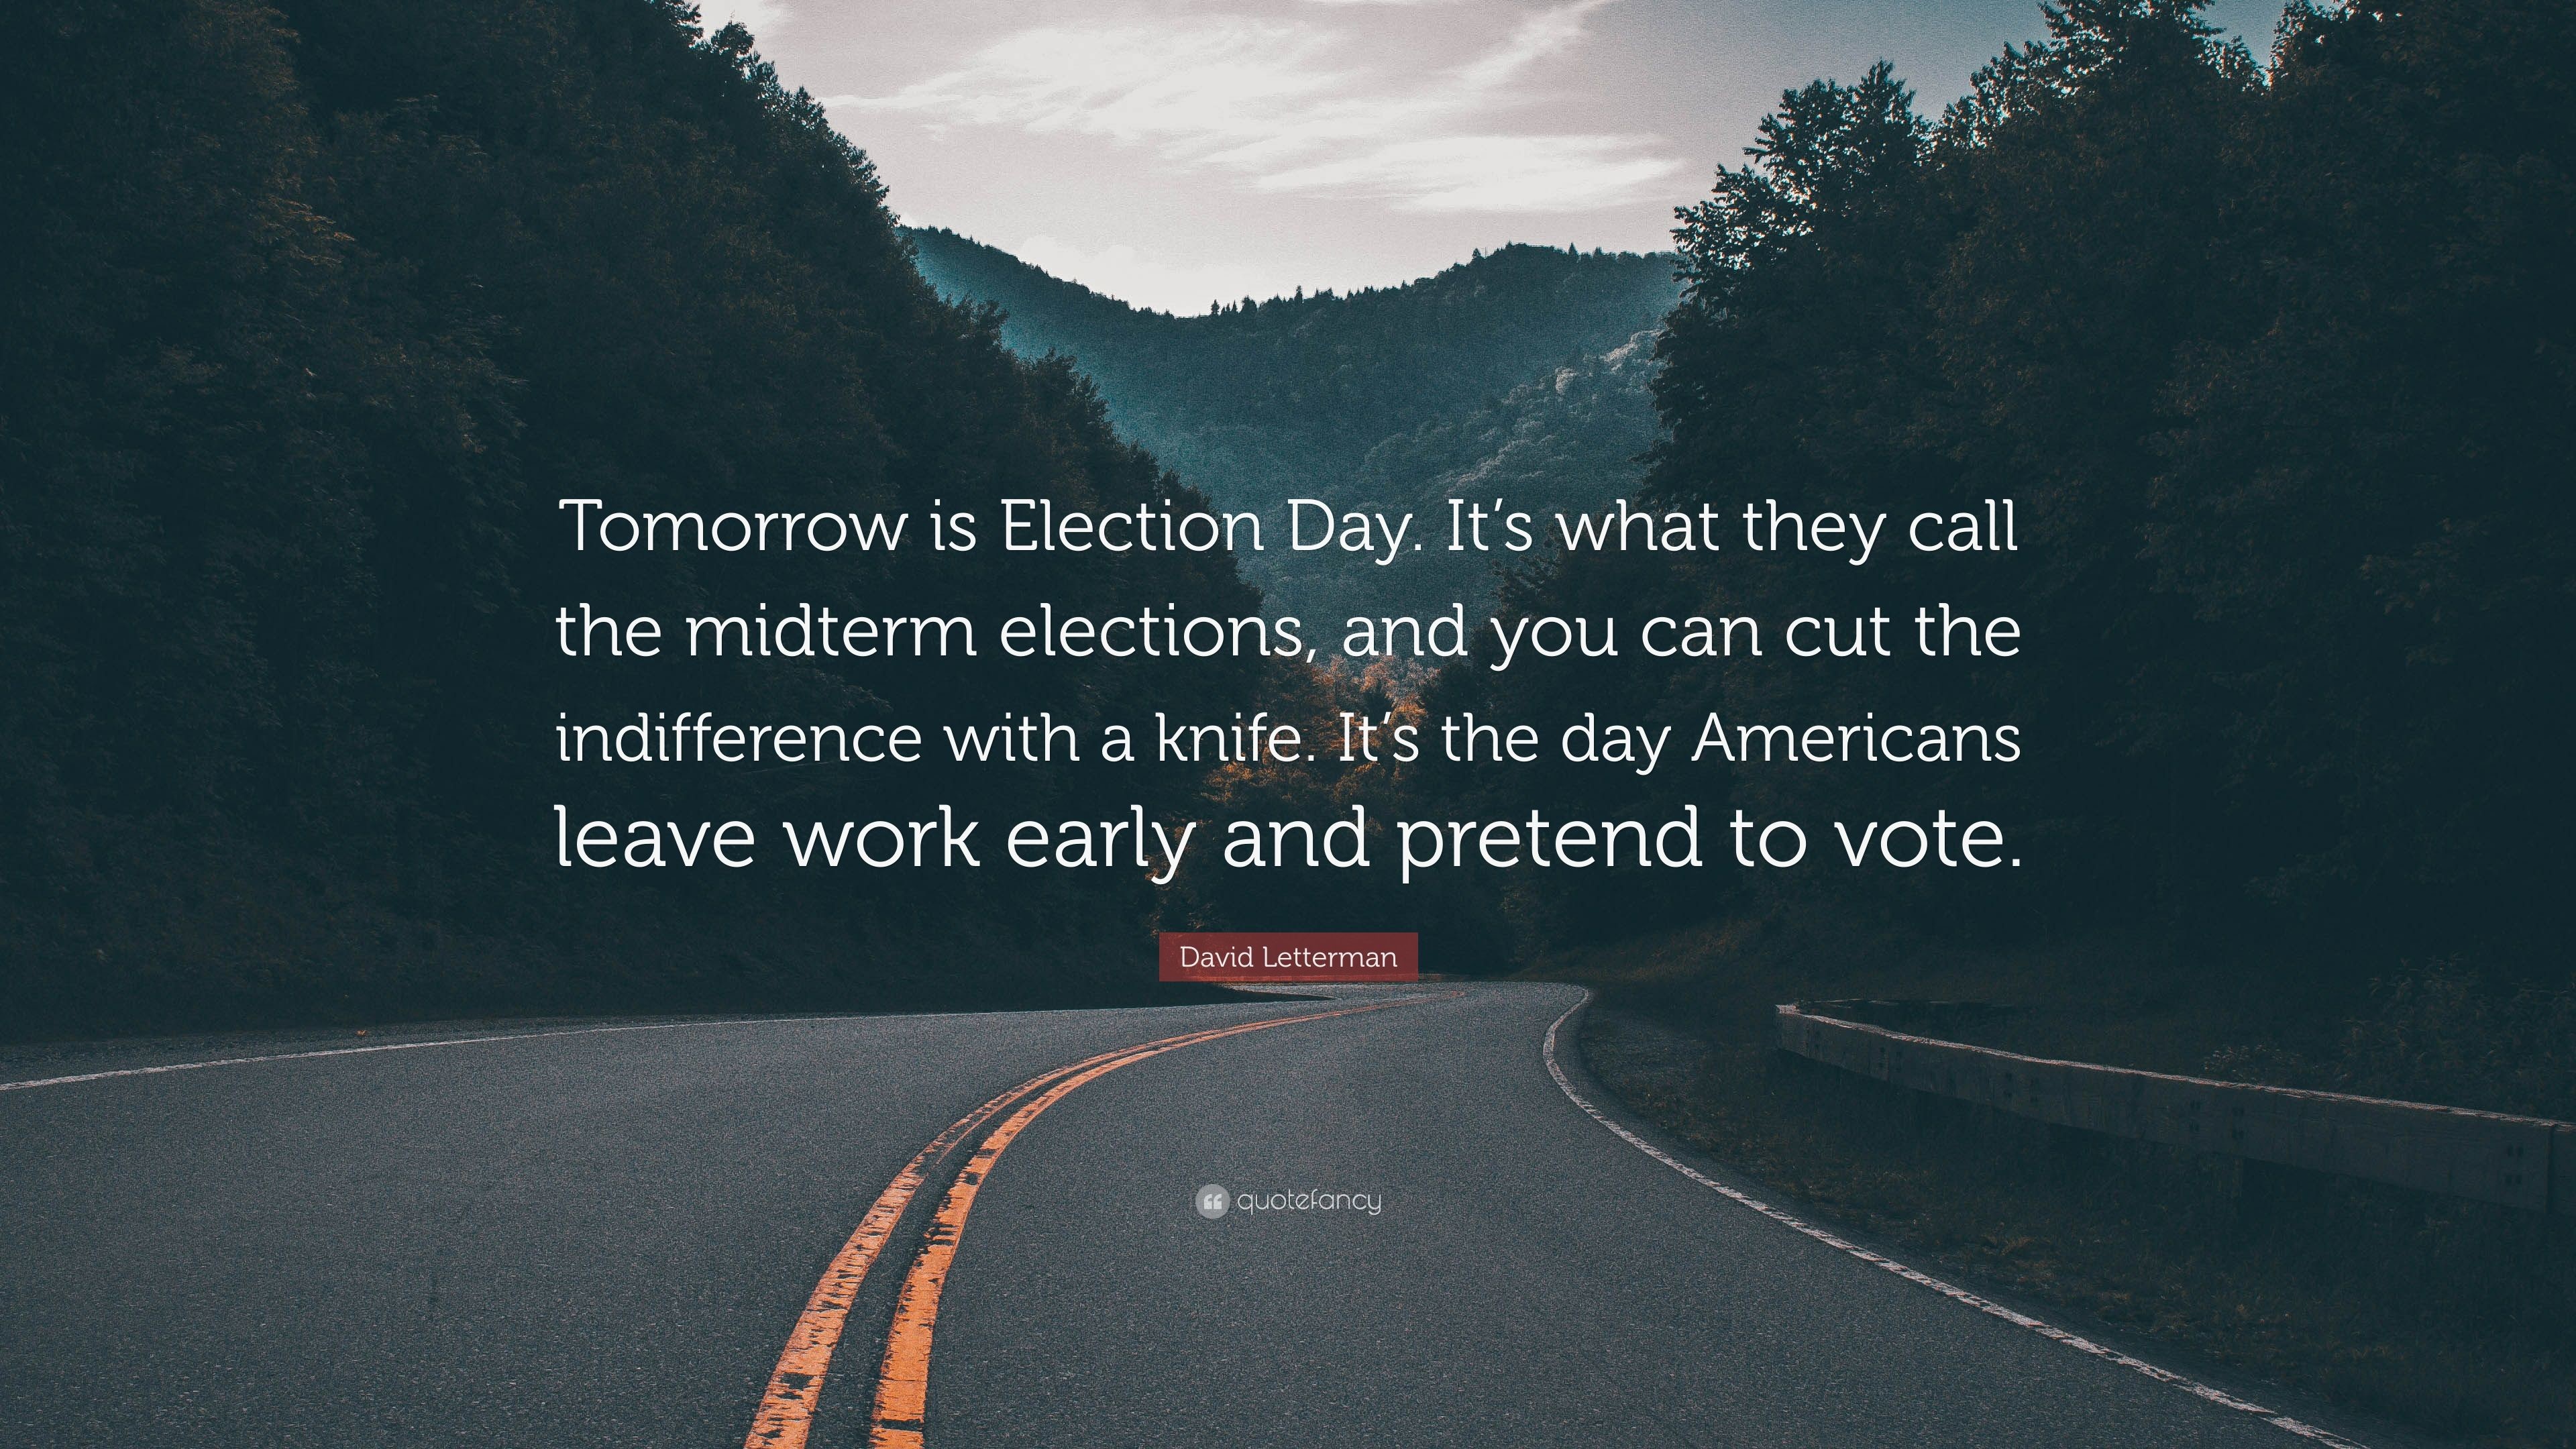 3840x2160 David Letterman Quote: “Tomorrow is Election Day. It's what they call the  midterm